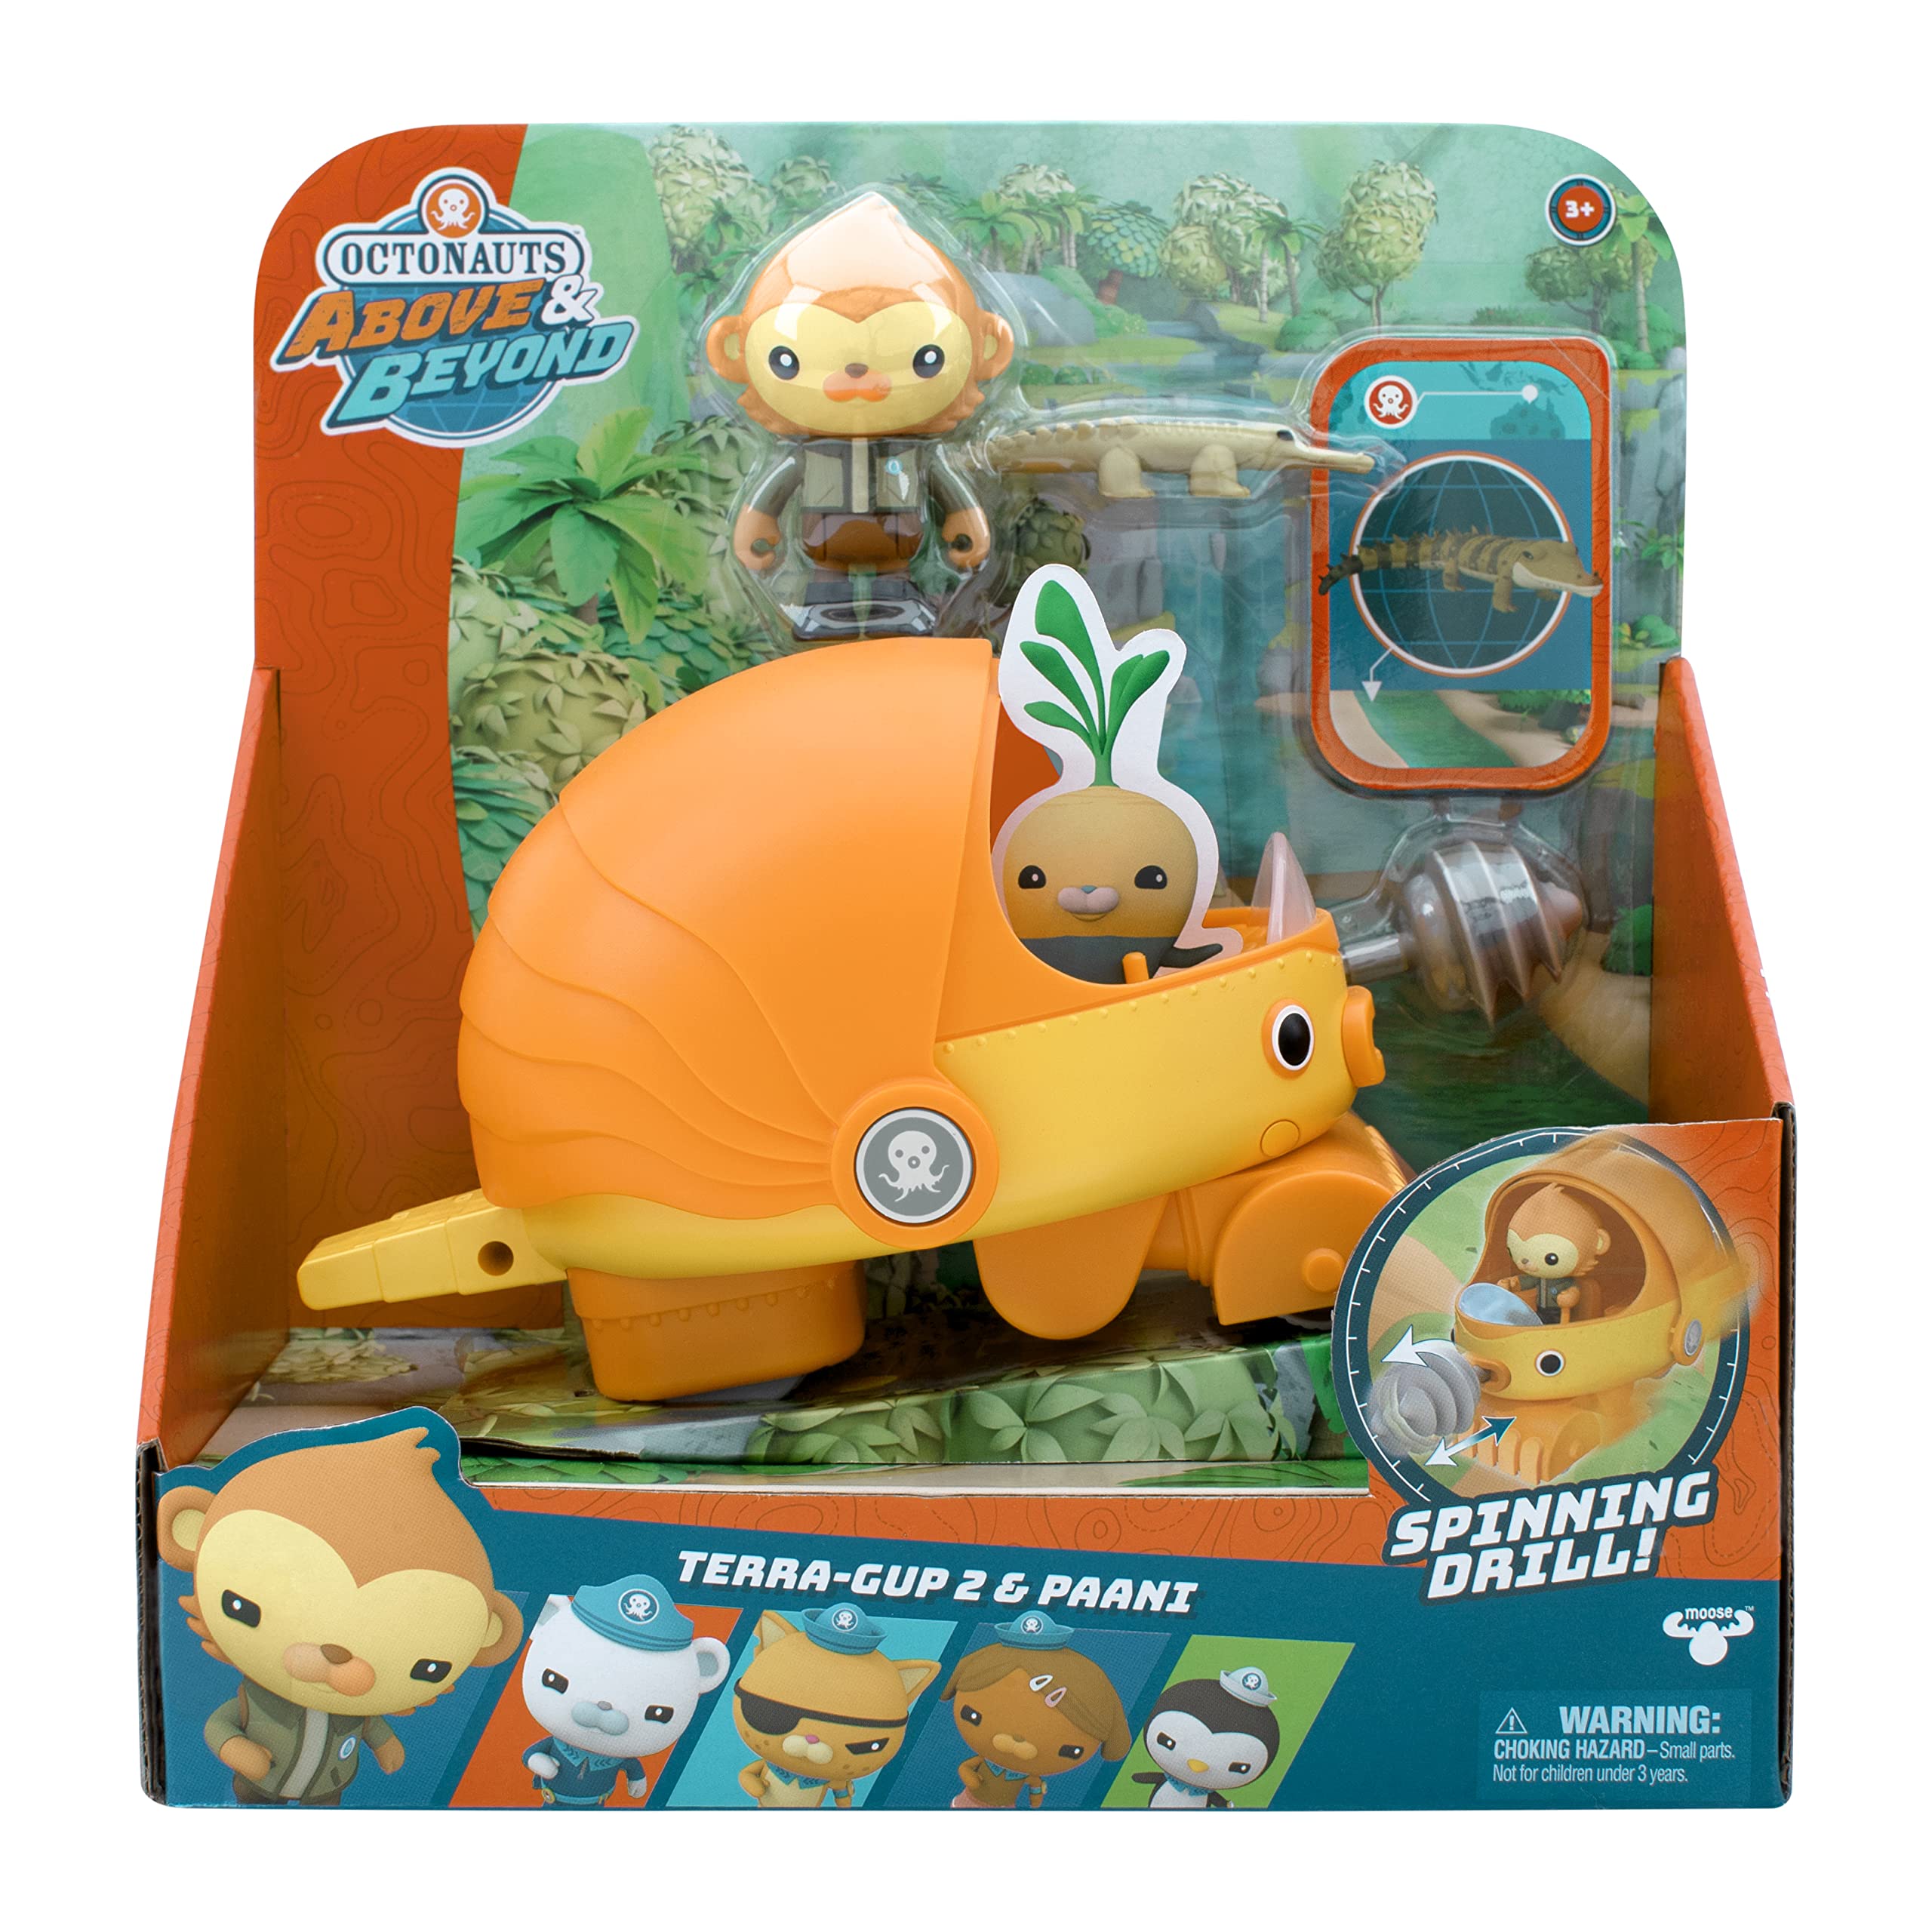 Disney OCTONAUTS Above & Beyond | Terra Gup 2 and Paani | Deluxe Toy Vehicle & Figure | Recreate Missions, Multicolor (61109)